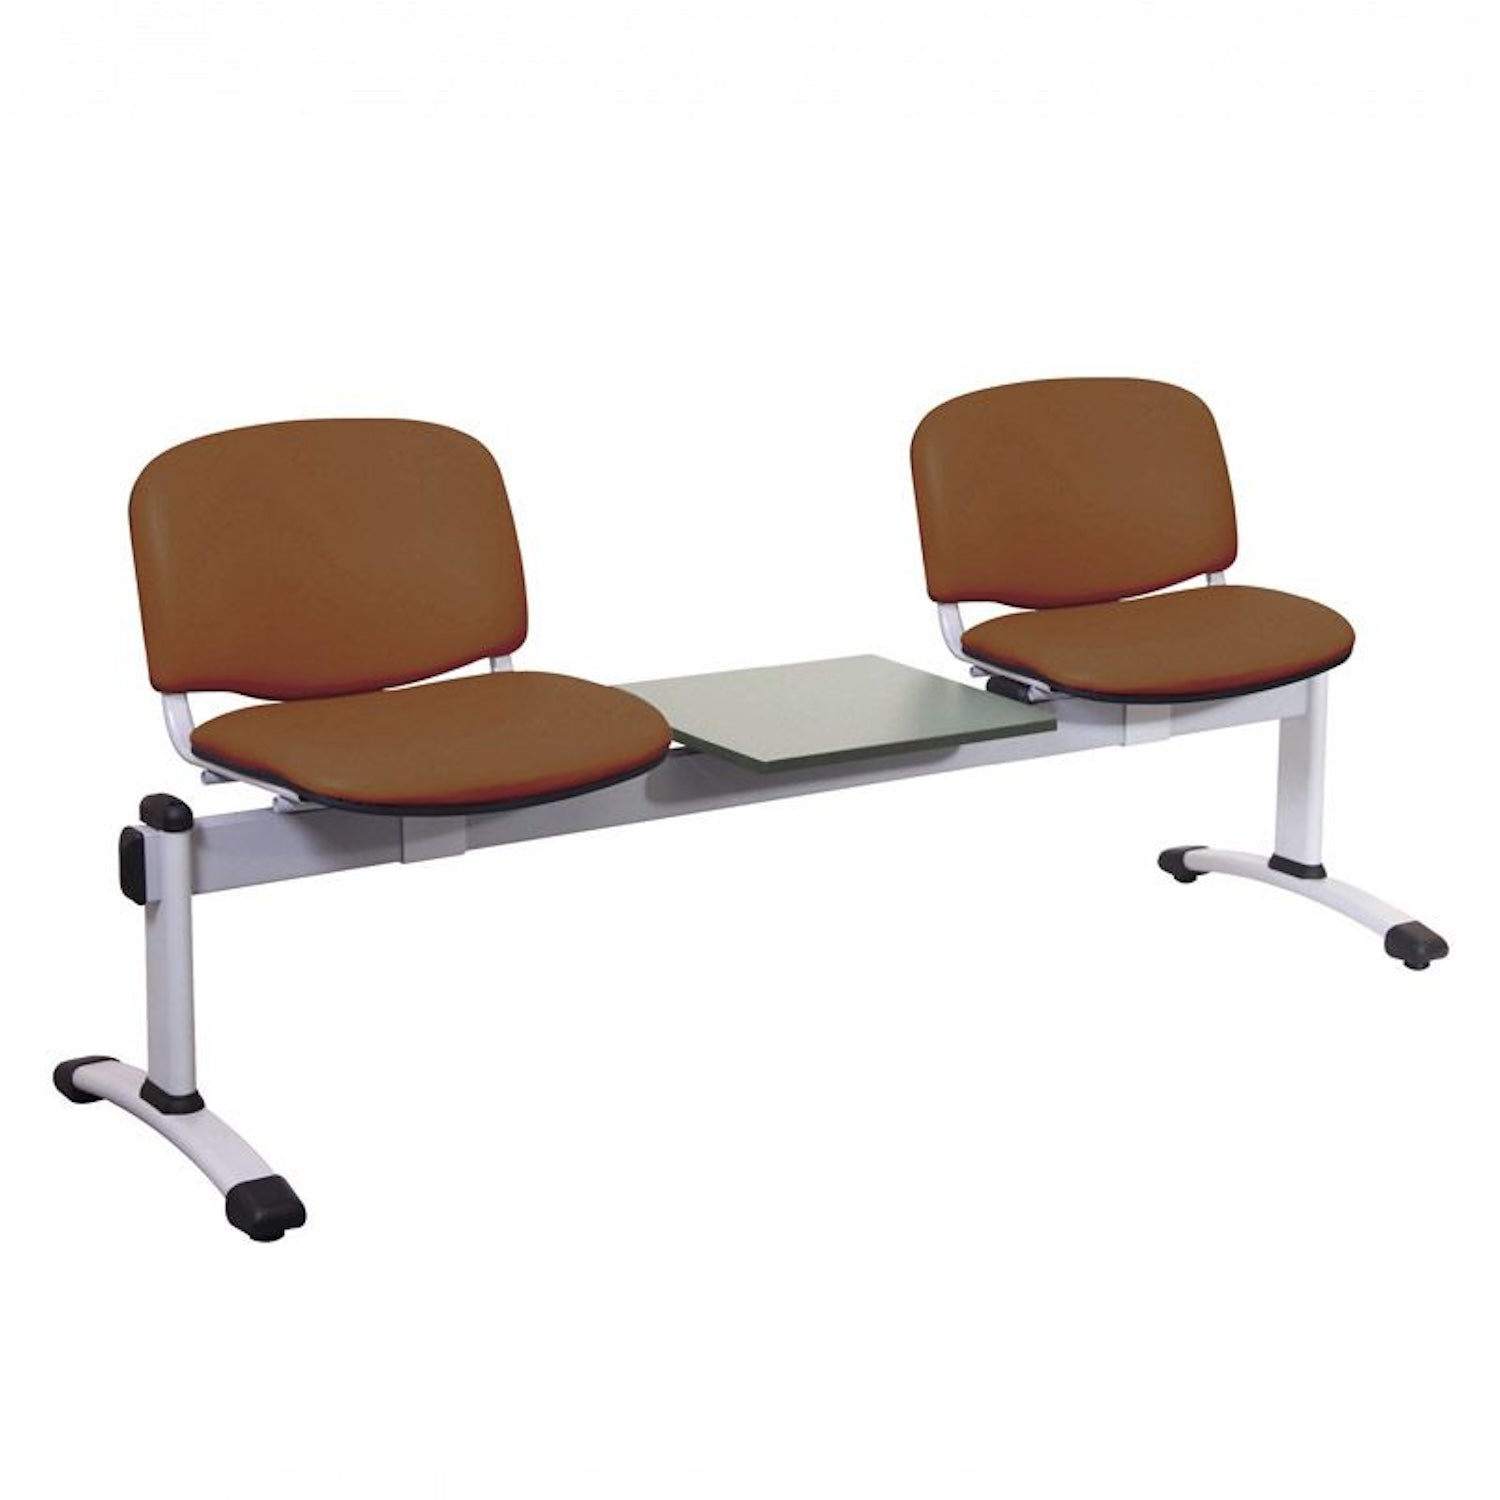 Sunflower Visitor 2 Anti-bacterial Vinyl Upholstery Seats & 1 Table Module in Walnut